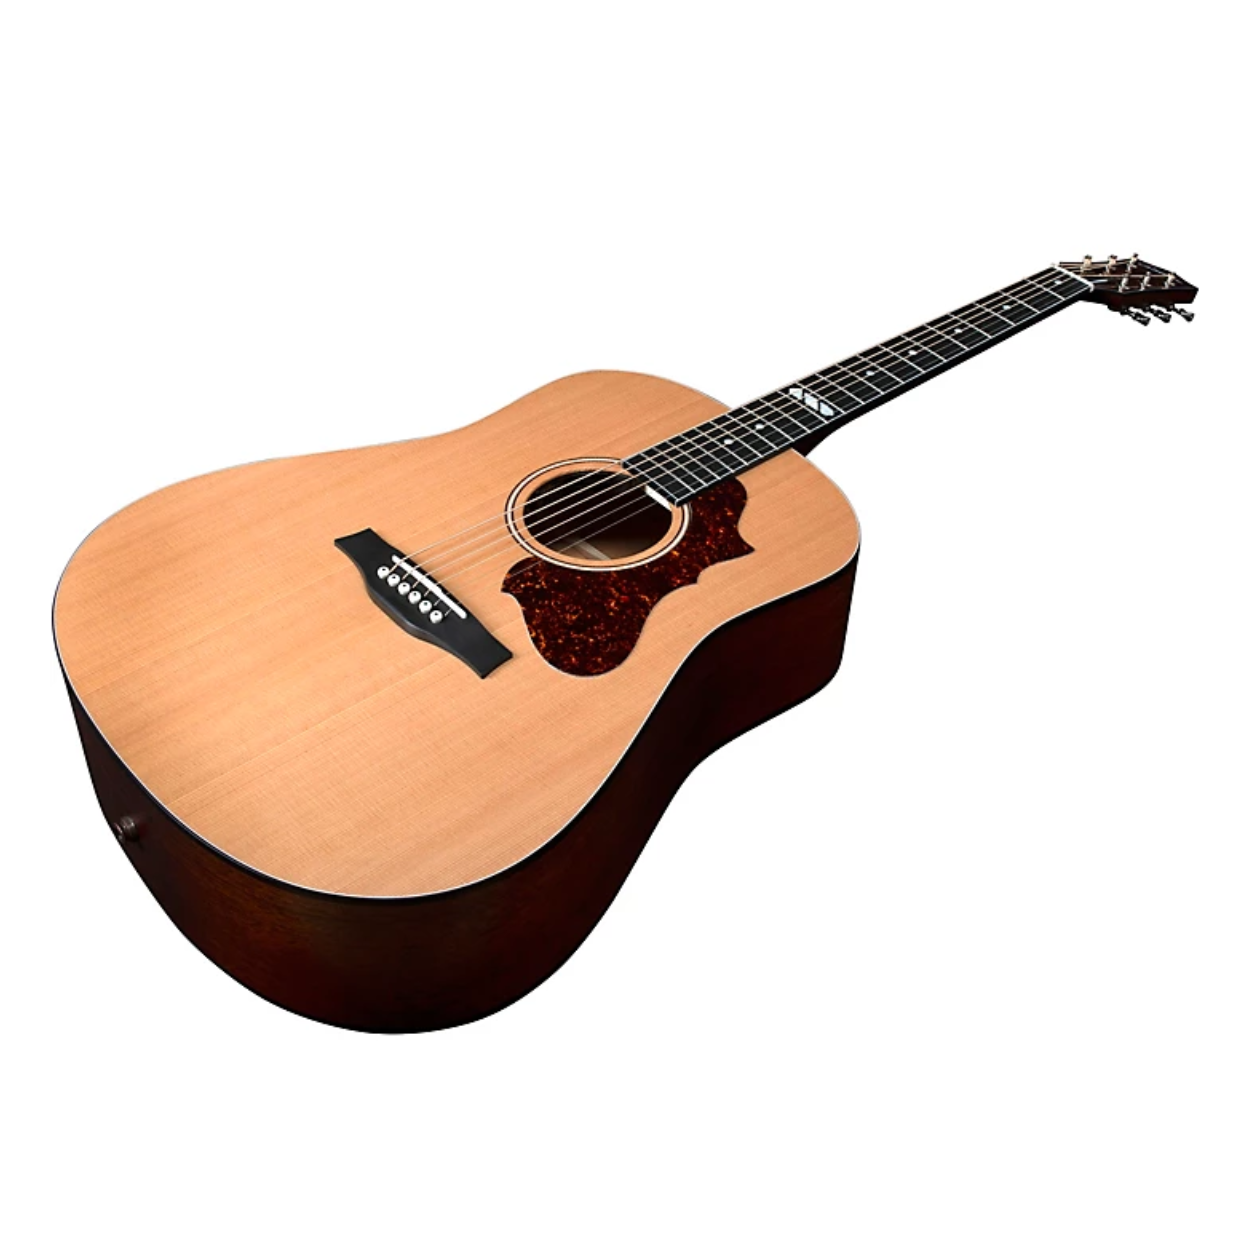 Godin Metropolis Ltd Natural Hg Eq Full Solid Acoustic Guitar With Tric Case High Gloss